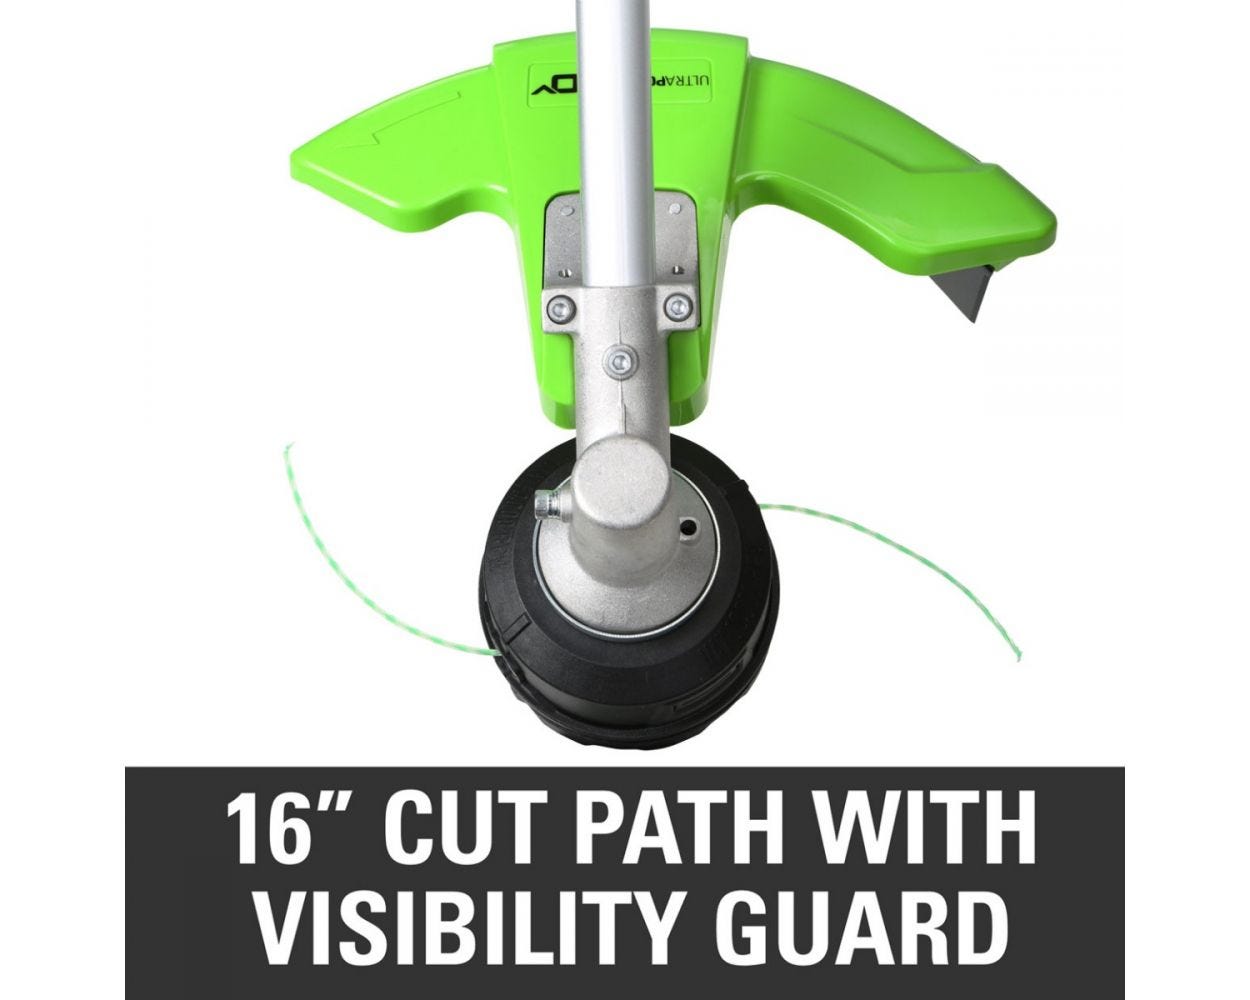 60V 16" Cordless Battery String Trimmer (Attachment Capable) & Horizontal Blower Attachment w/ 4.0 Ah Battery & Charger